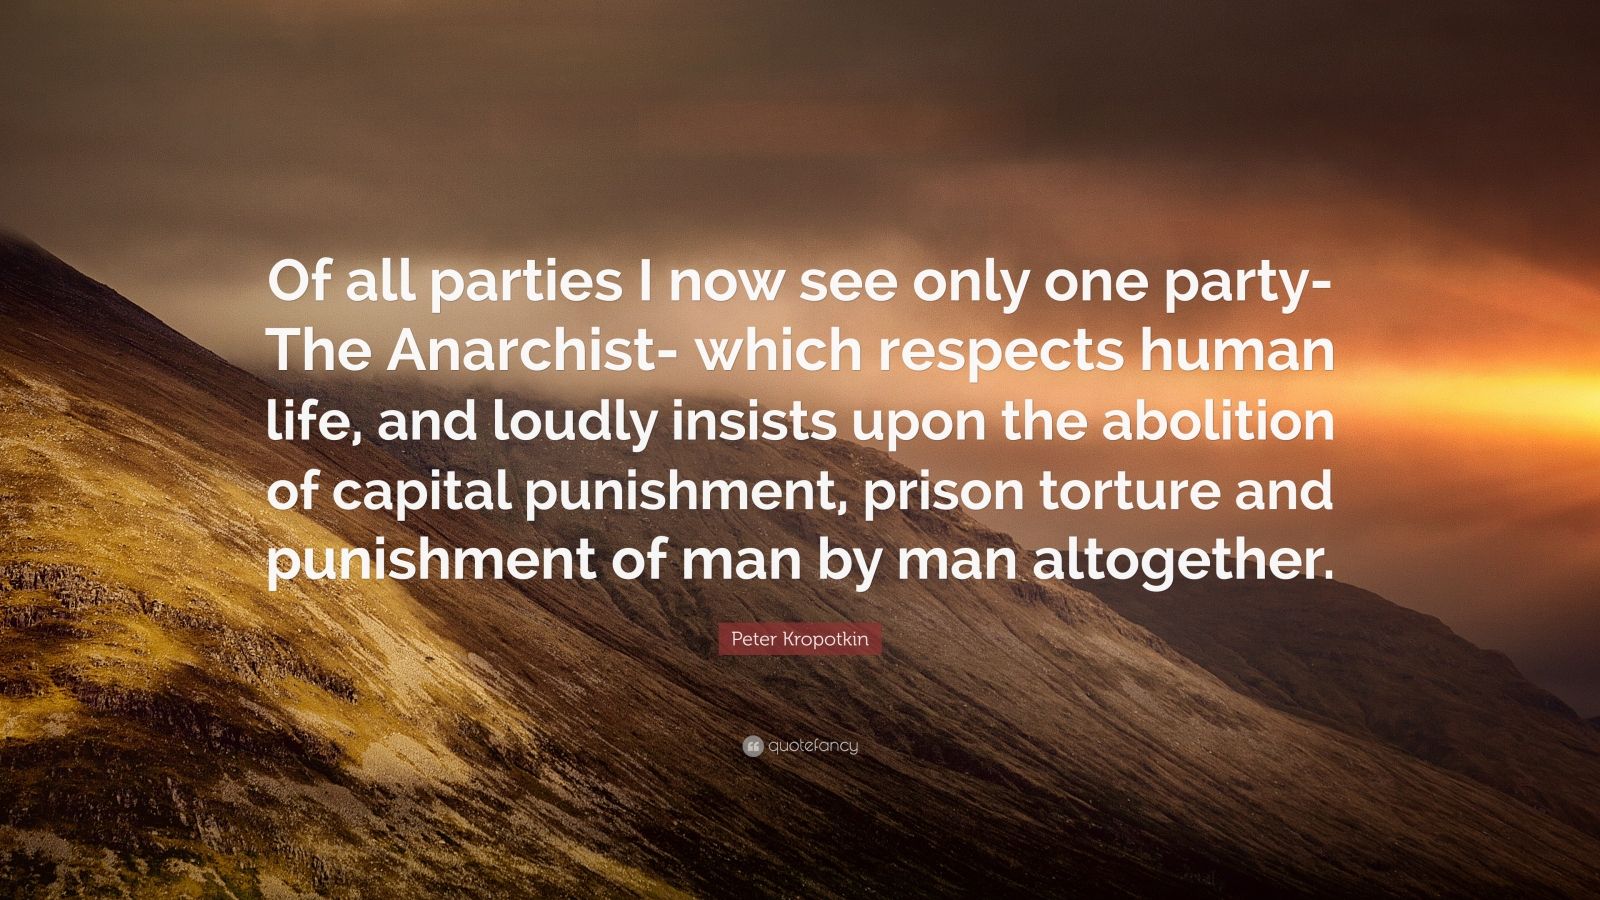 Peter Kropotkin Quote: “Of all parties I now see only one party- The